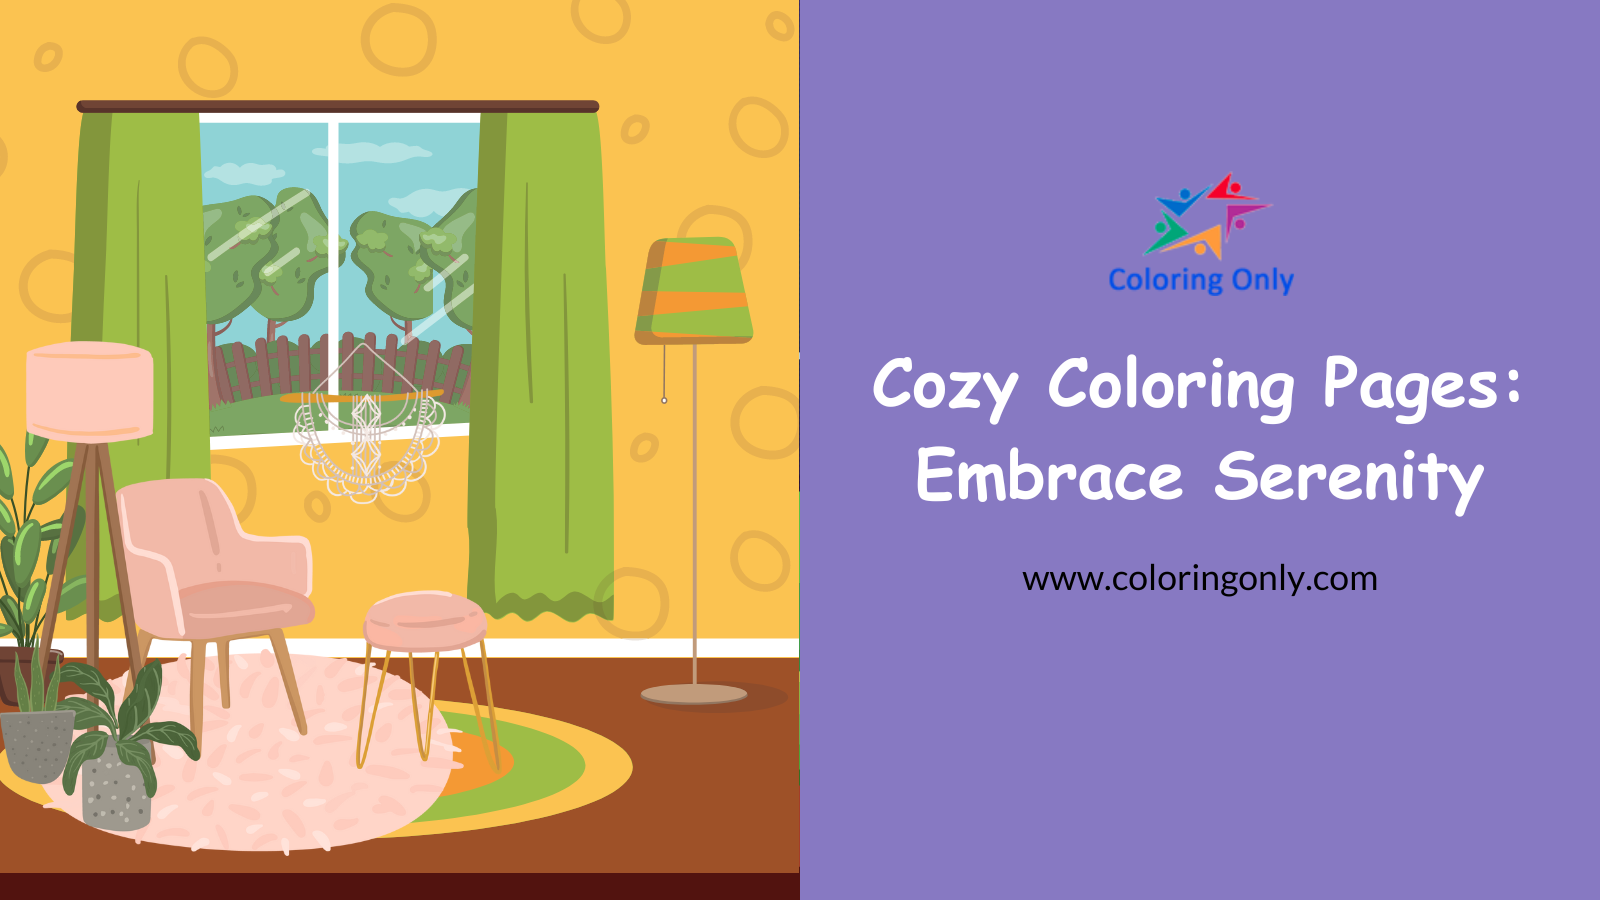 Cozy Coloring Pages: Embrace Serenity